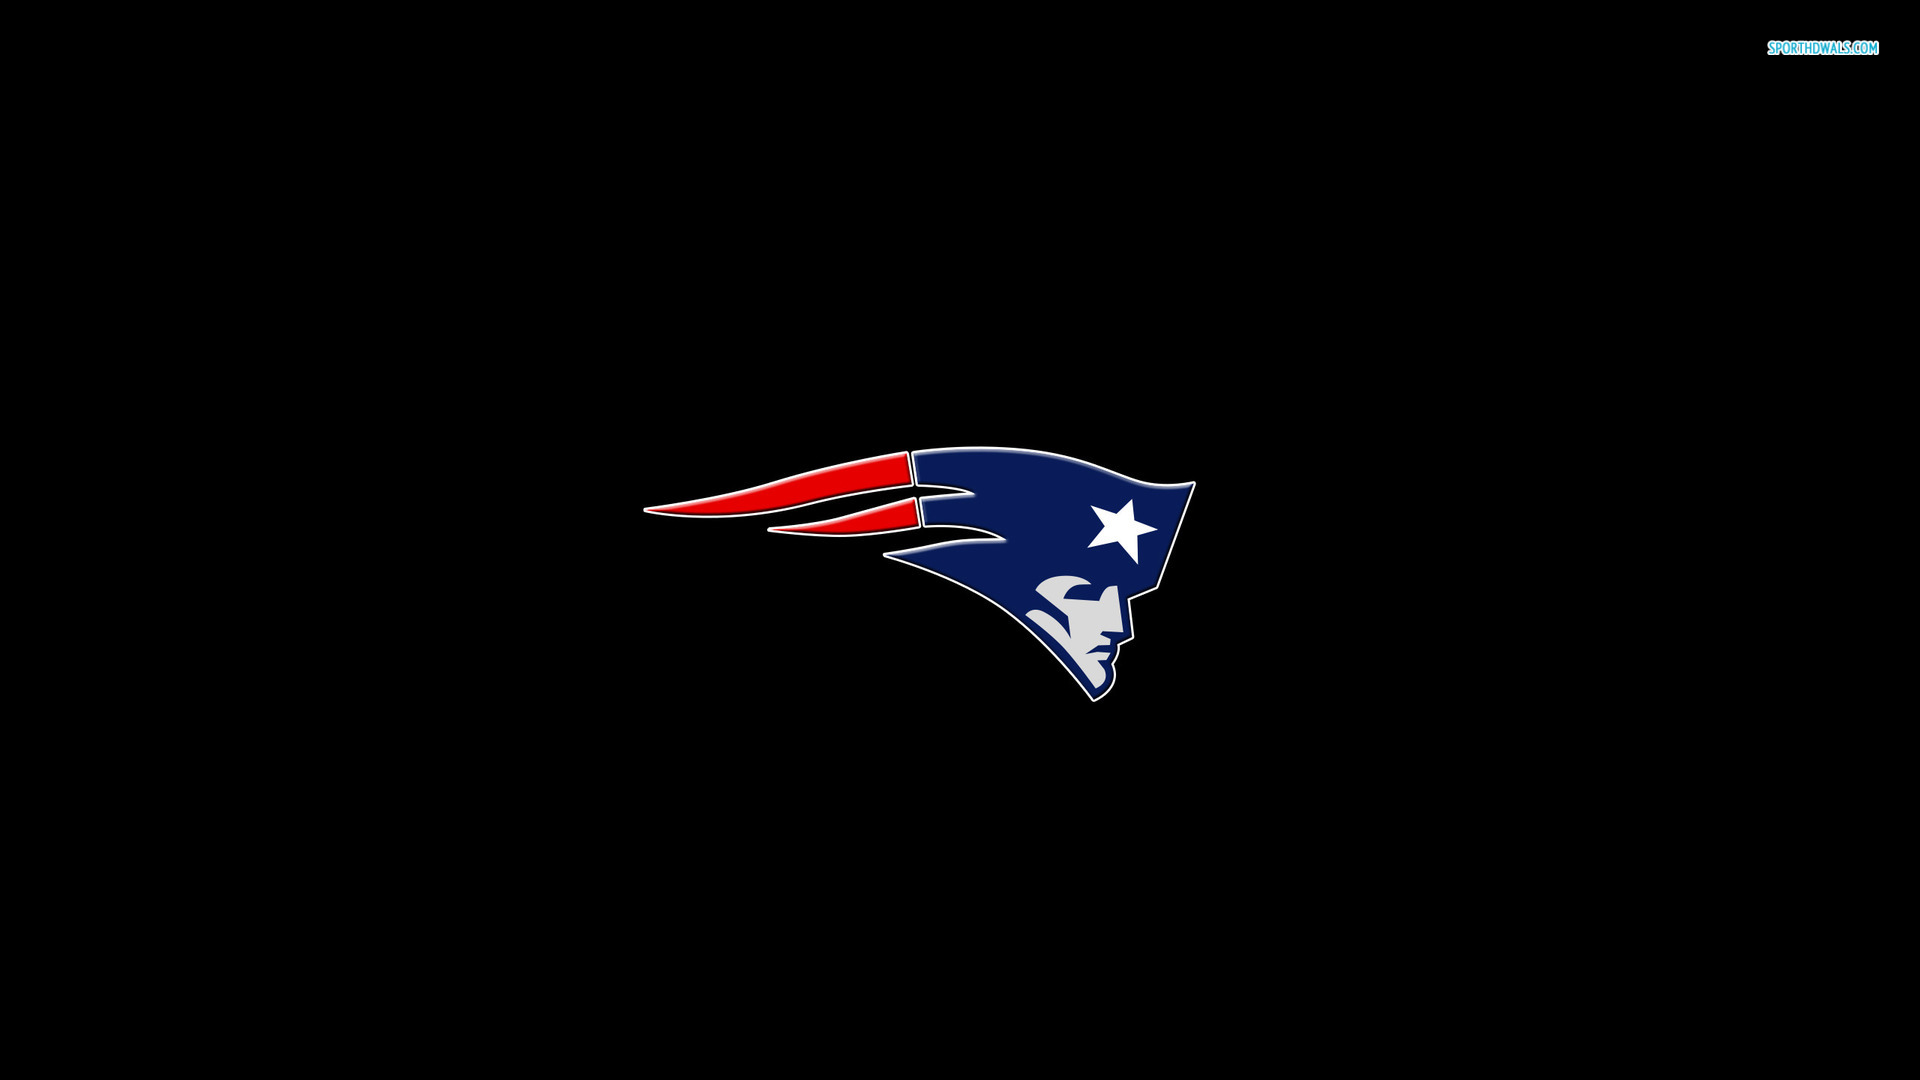 New England Patriots Background Image Wallpaper